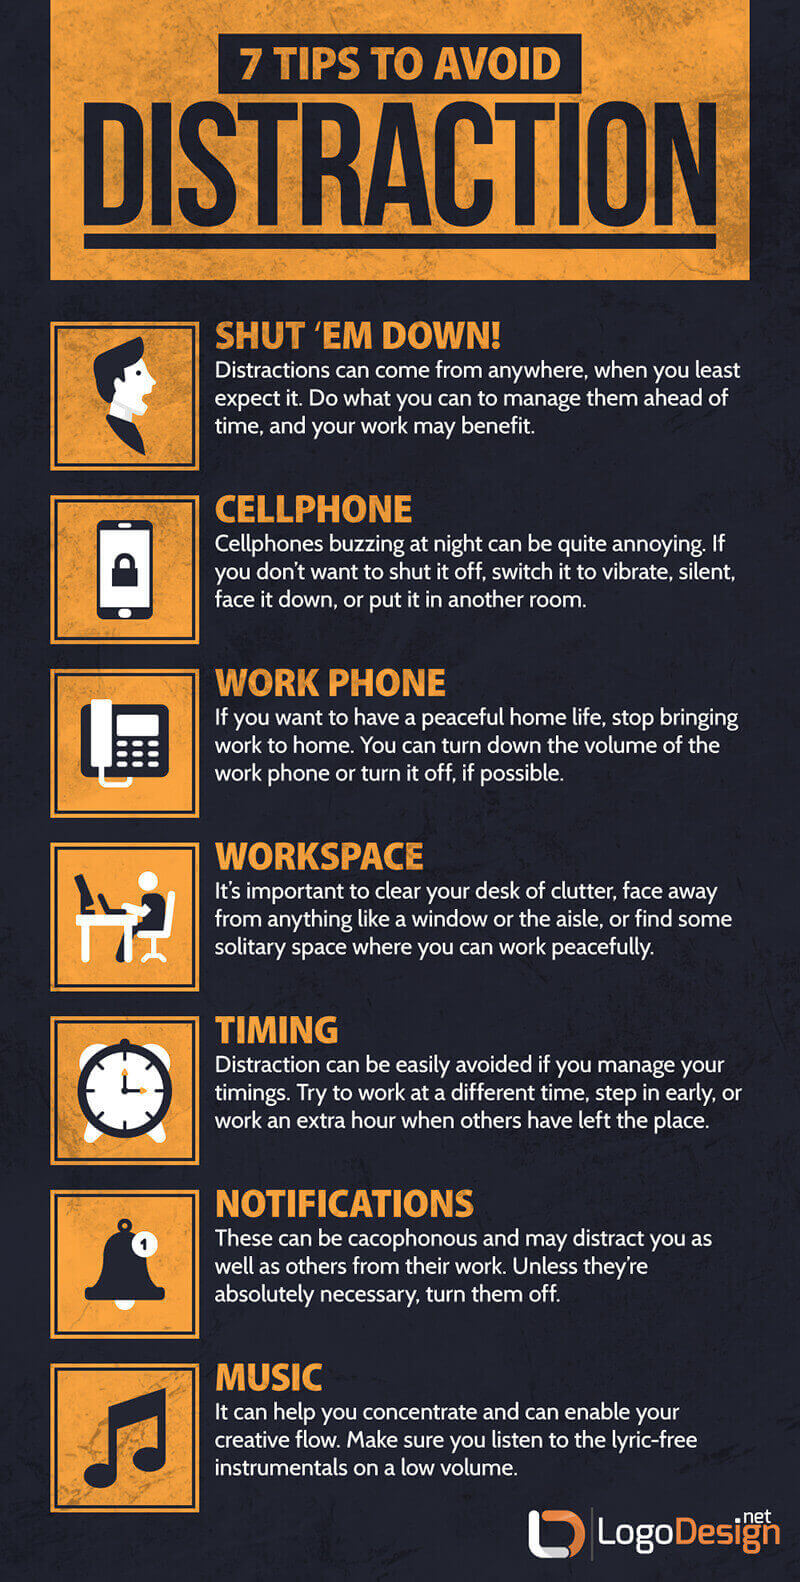 7 tips to avoid distraction for ADHD individuals infographic